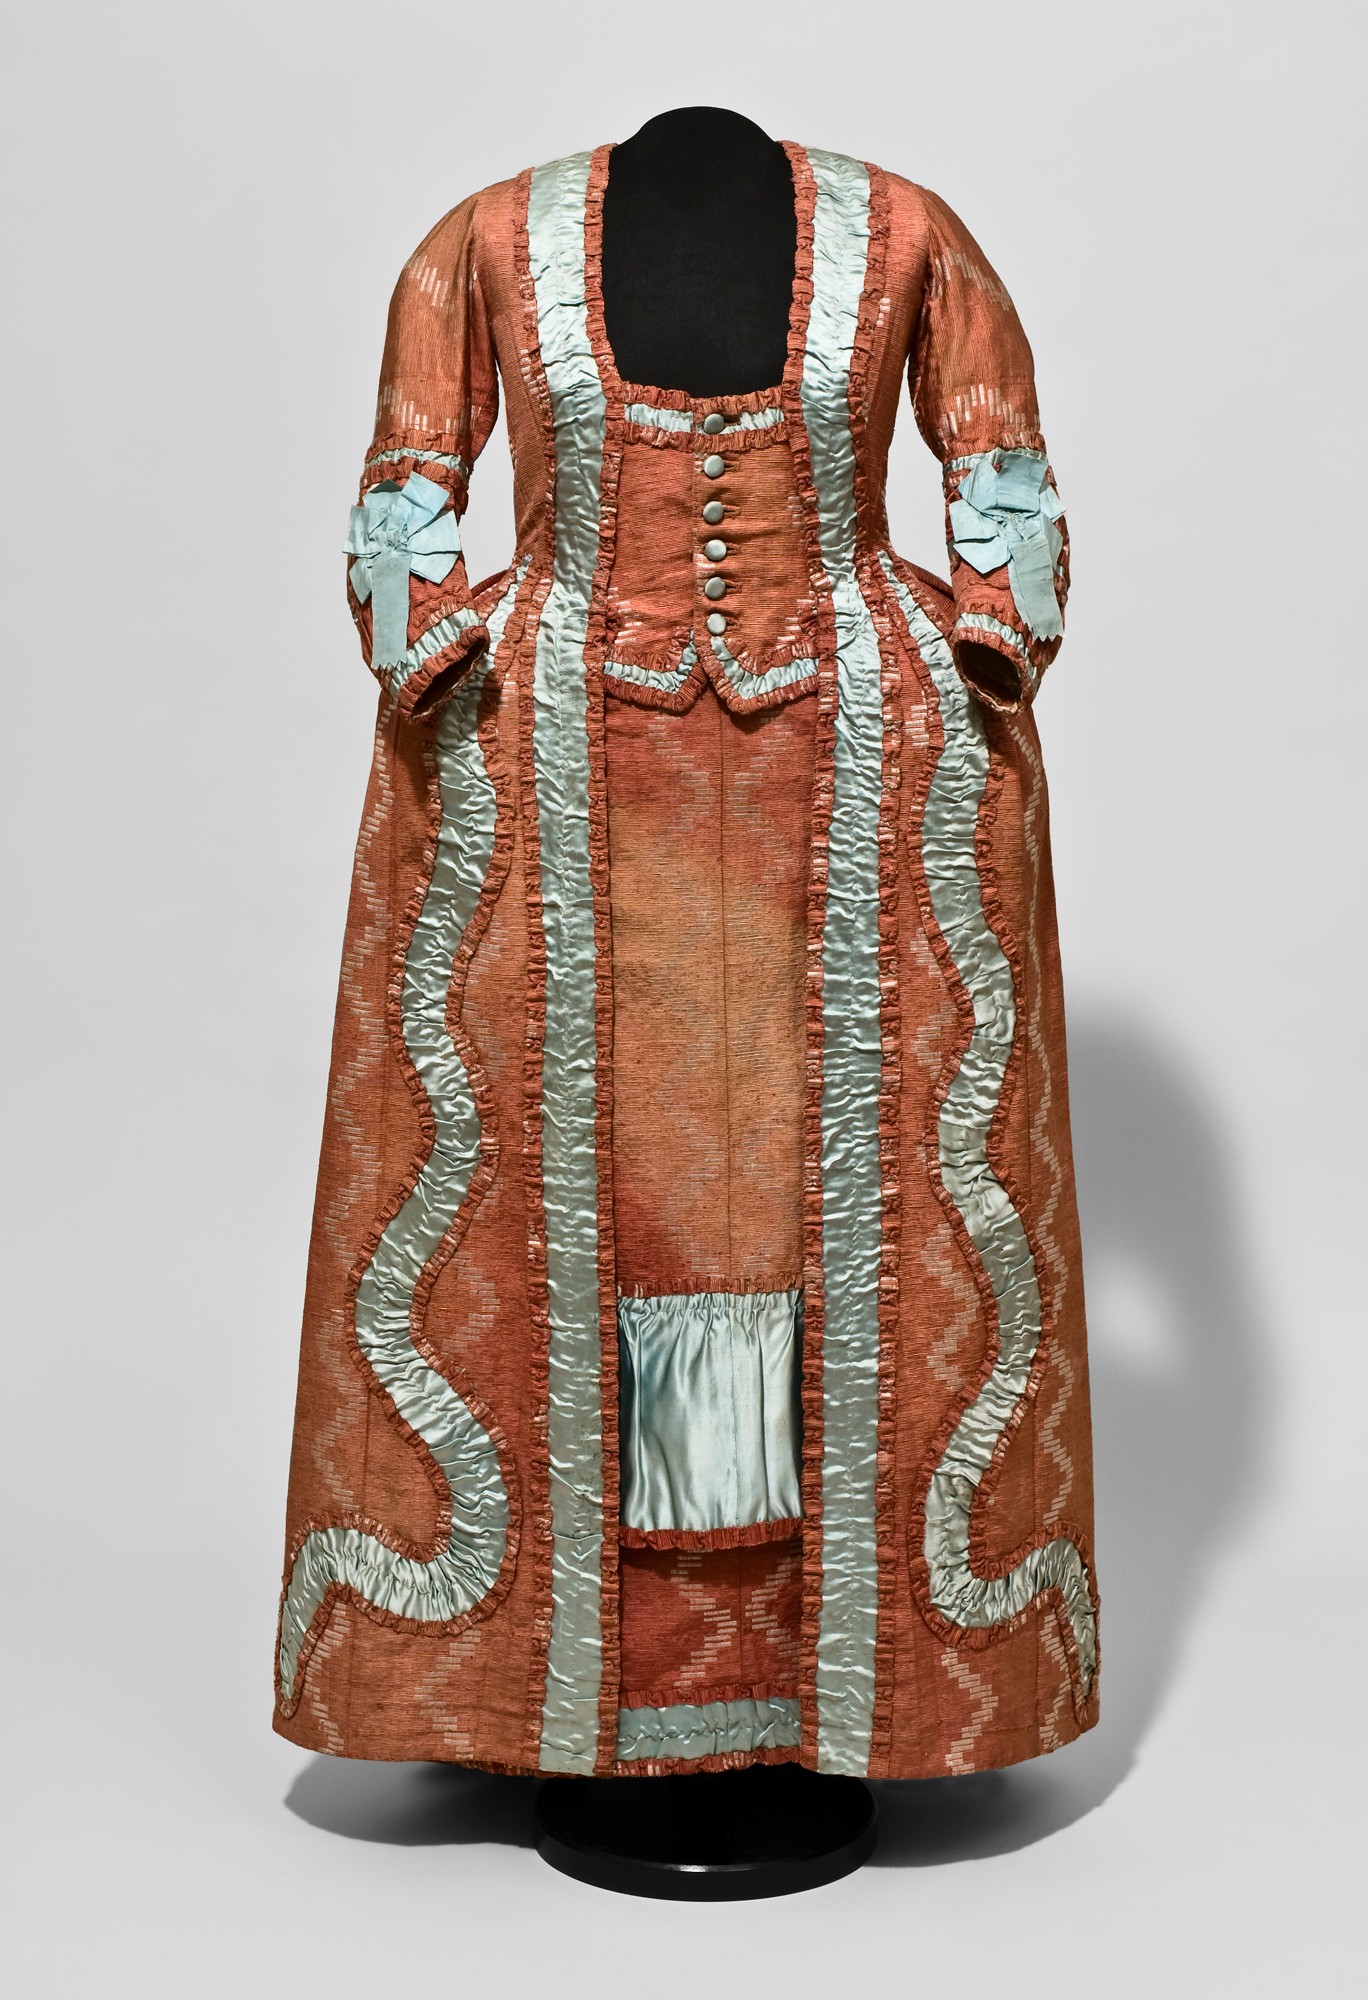 <BODY>RED MANTEAU (MANTLE) DRESS with watteau pleat and blue trimmings</BODY>